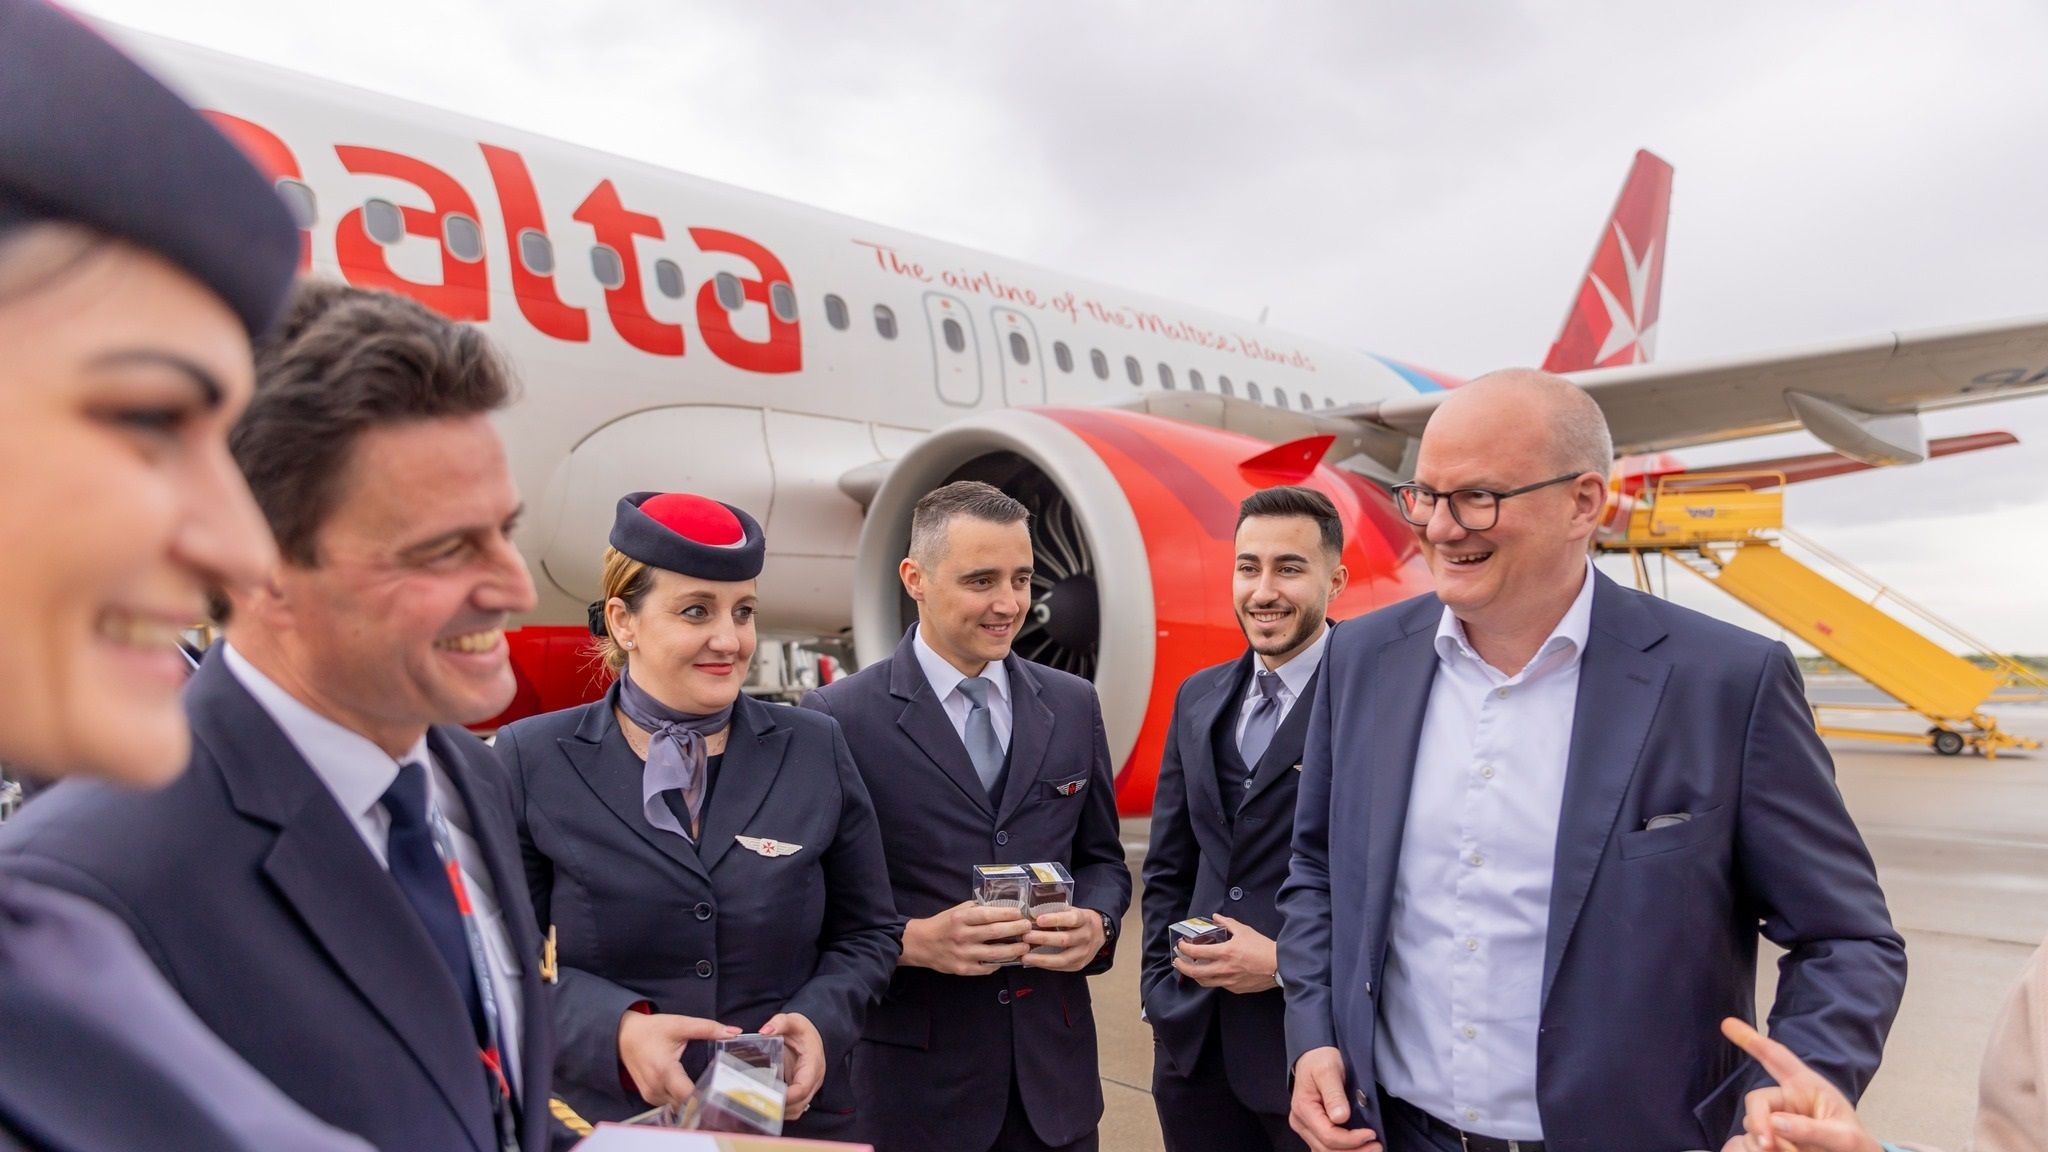 A Whole New Airline: How KM Malta Is Differentiating Itself From Air Malta